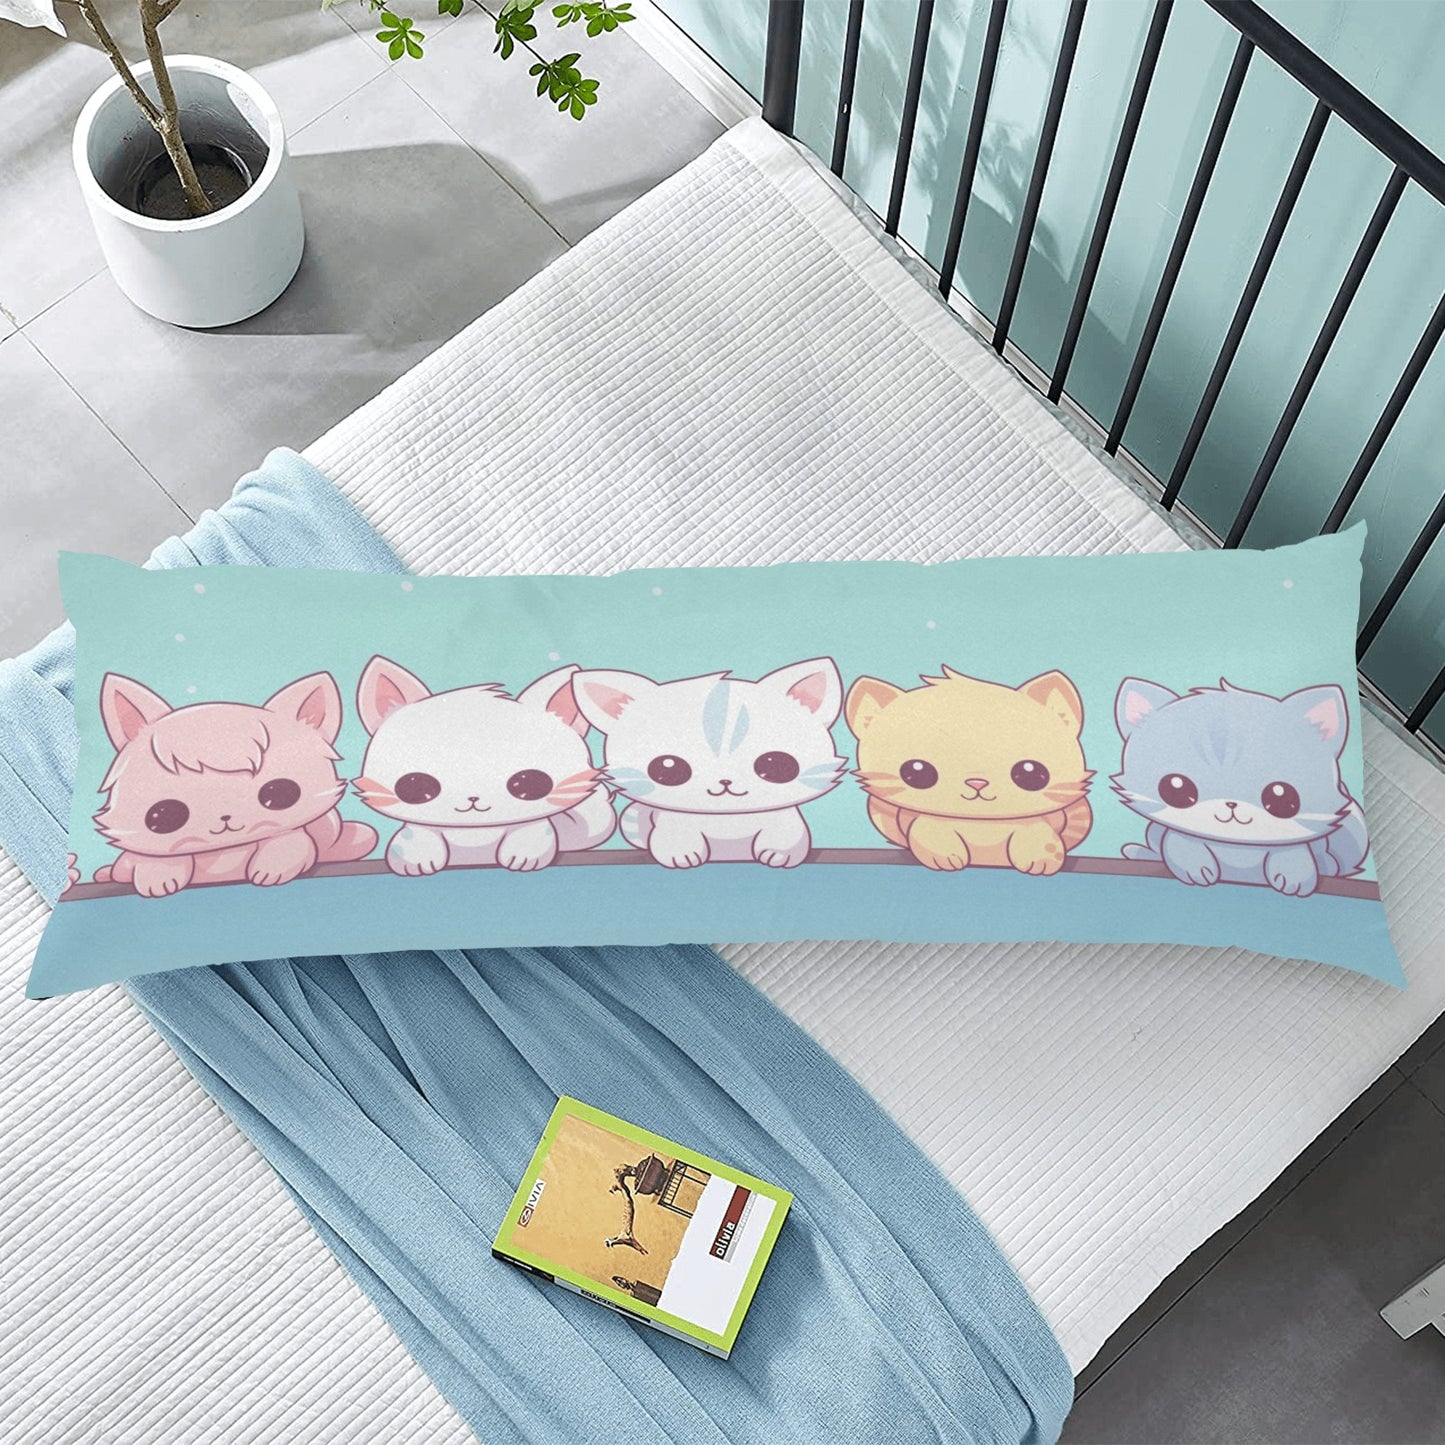 Cats Body Pillow Case, Cute Anime Kawaii Kittens Long Full Large Bed Accent Print Throw Decor Decorative Cover 20x54 Satin